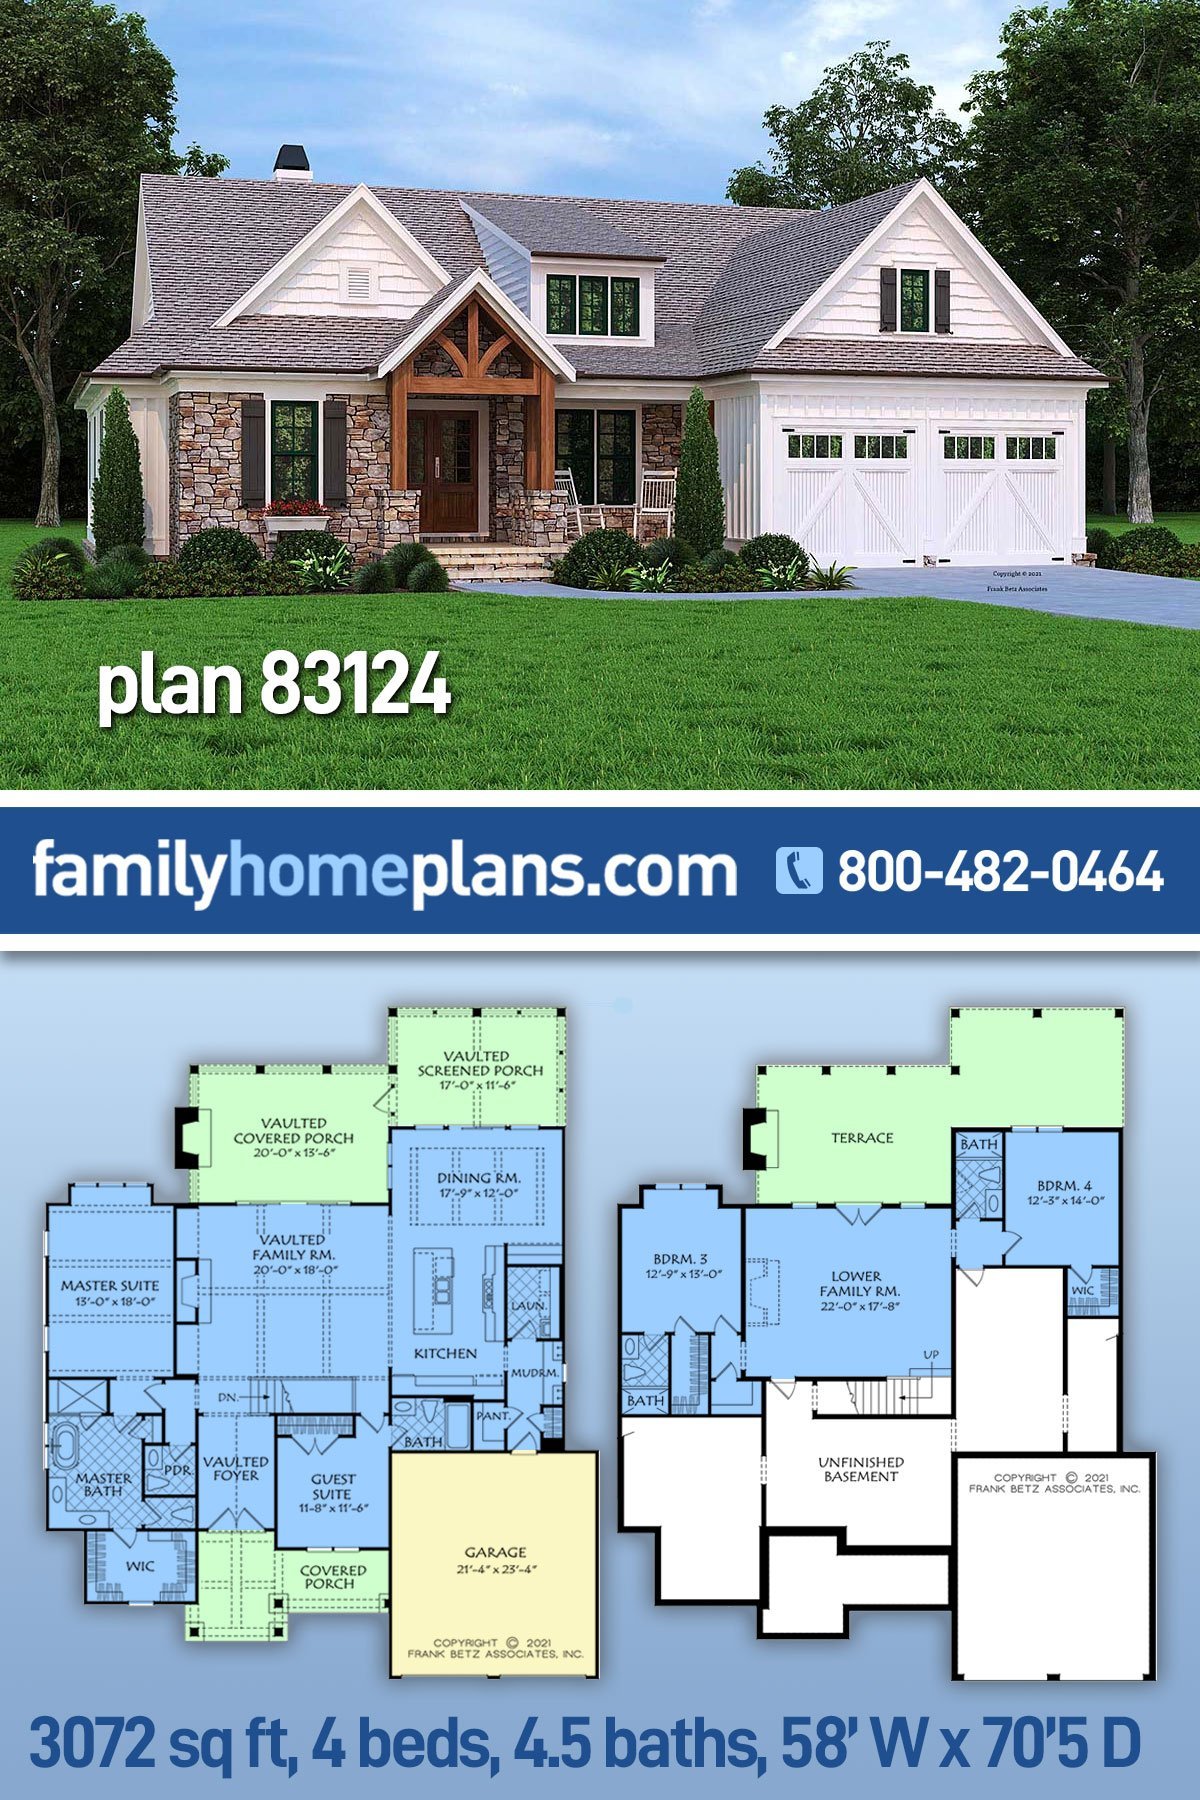 Plan 83124 | Four Bedroom House Plan with Timber-Framed Gable, 30